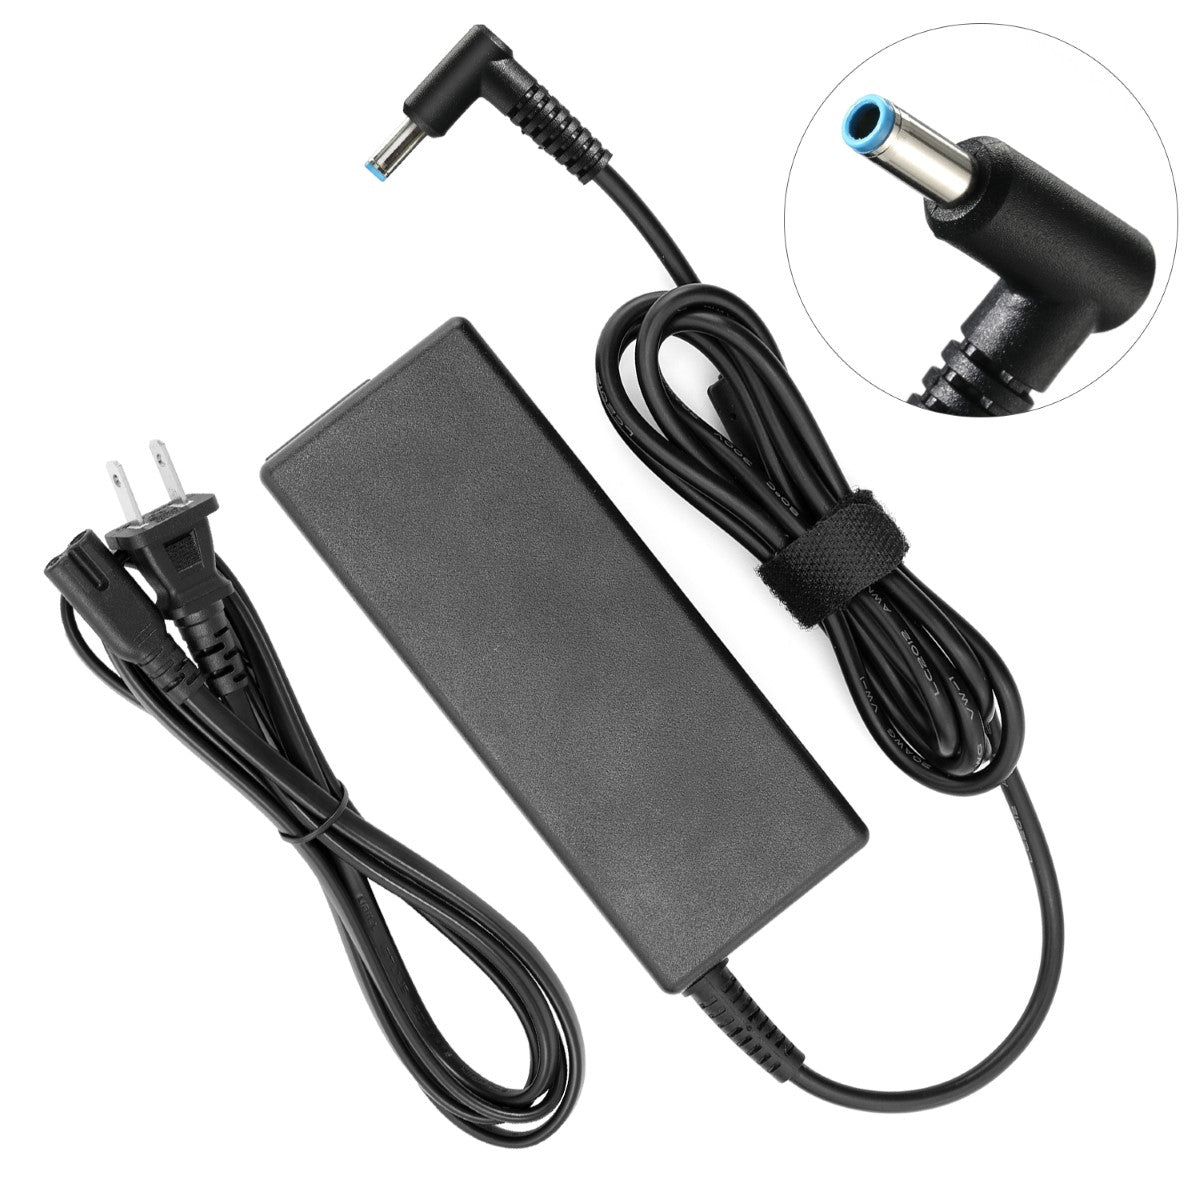 AC Adapter Charger for HP Envy TouchSmart 15-j063cl Notebook.